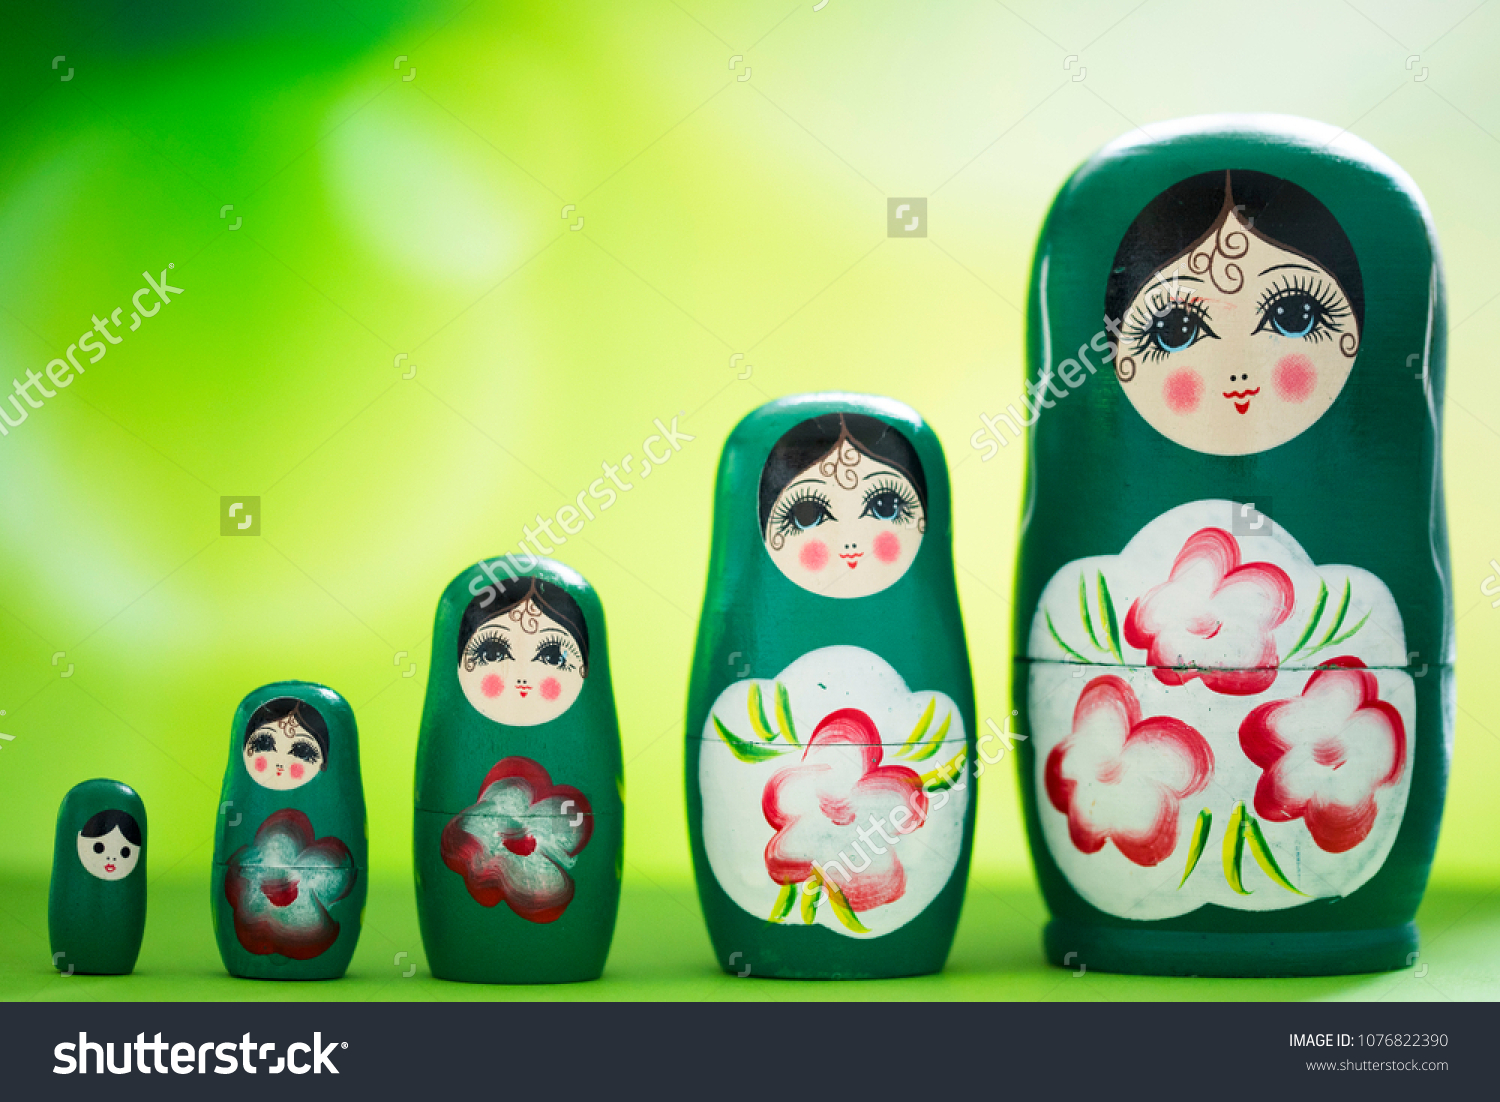 russian doll one inside the other